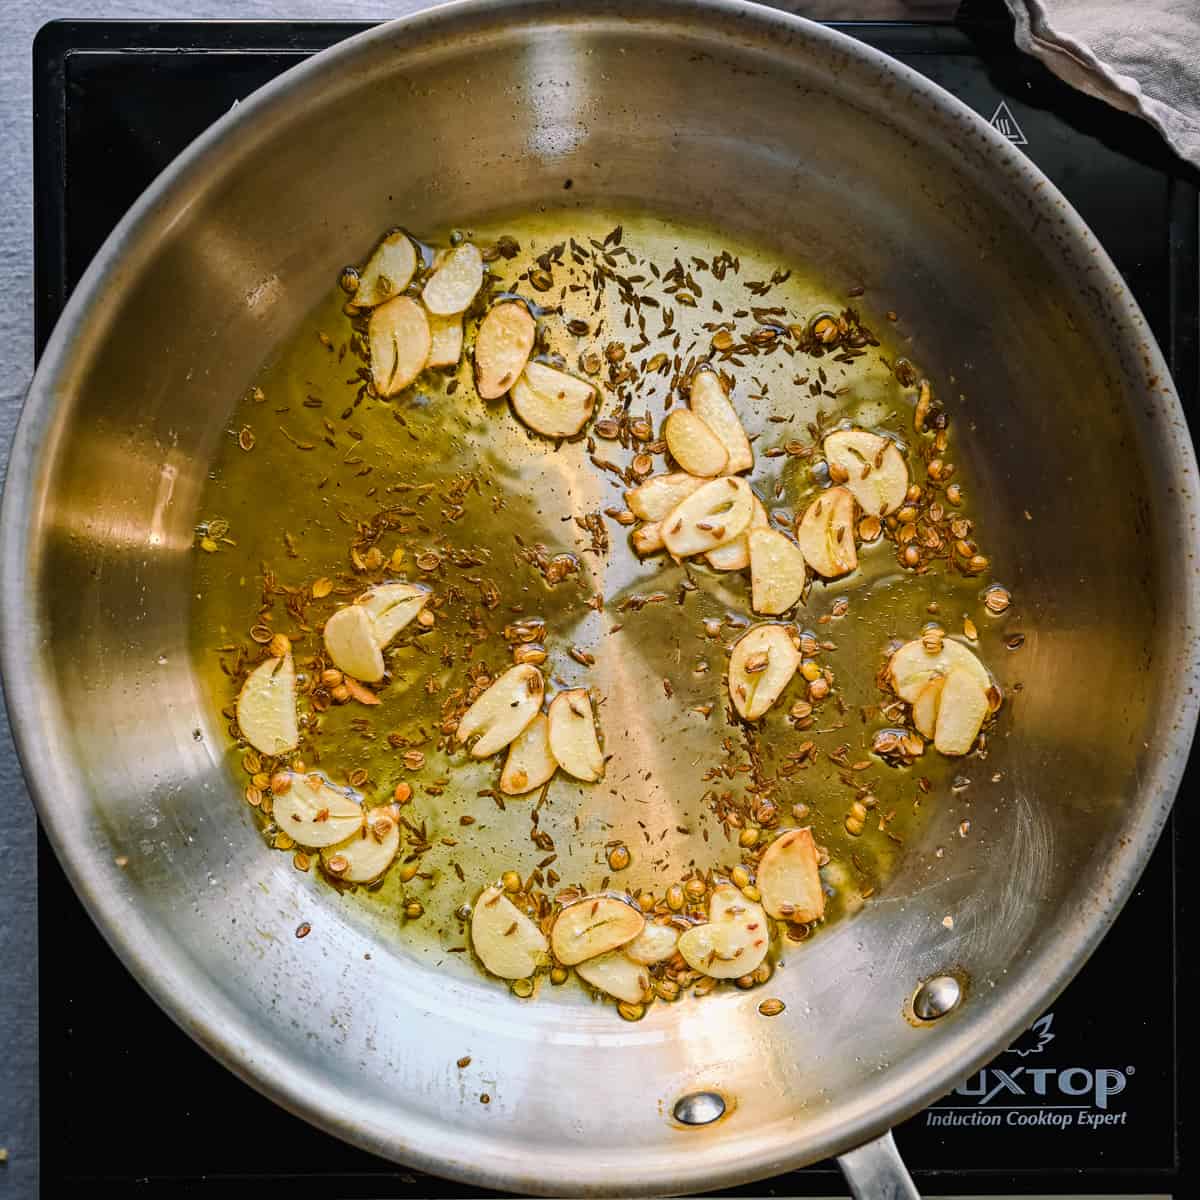 sliced garlic and cumin and coriander seeds frying in olive oil in a frying pan